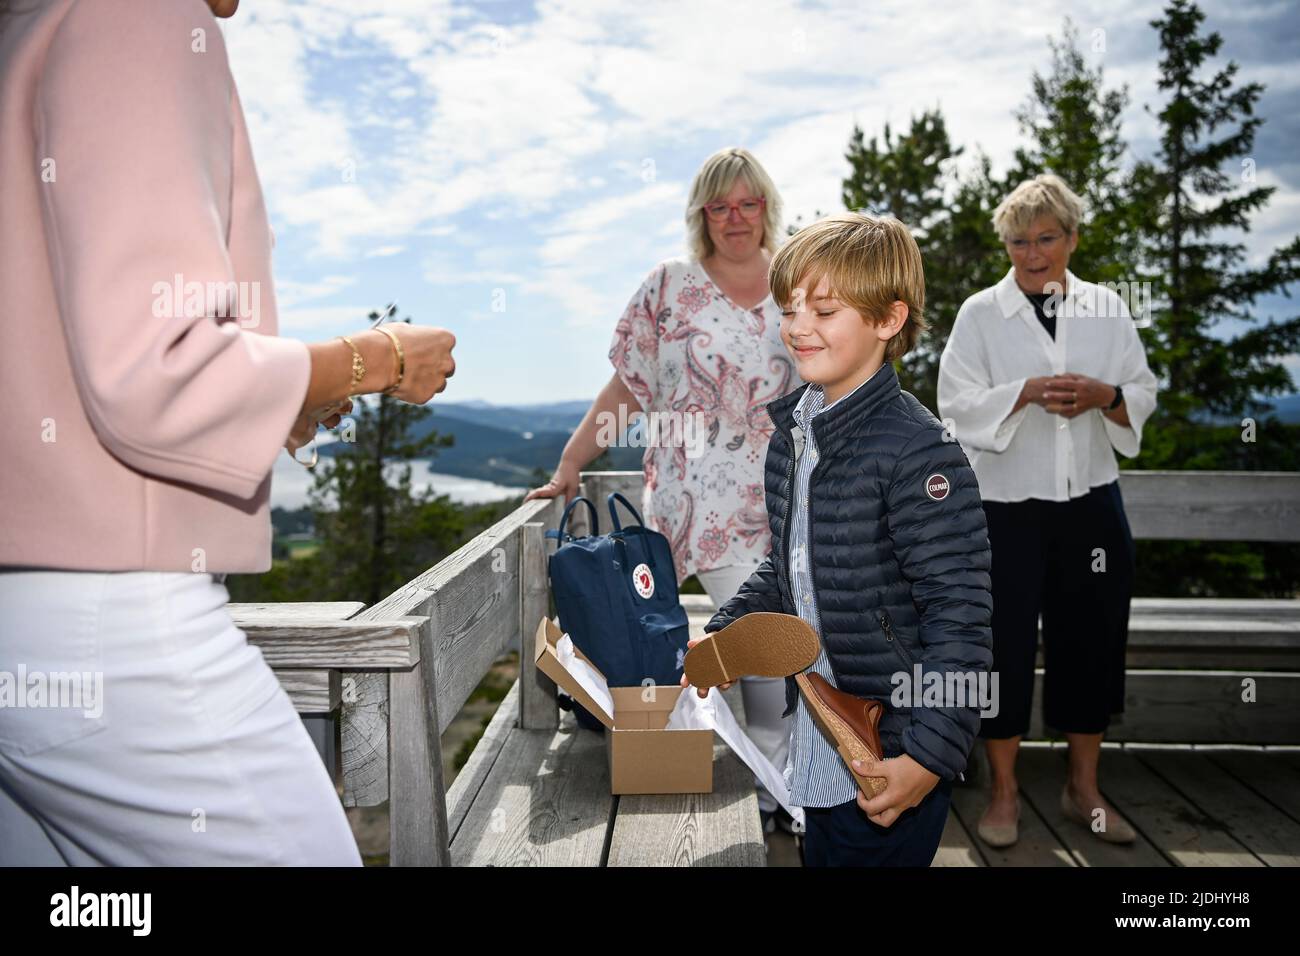 Skuleberget, Sweden, June 21, 2022, Prince Nicolas and Princess Madeleine with County Governor Berit Hogman (right) and Malin Svanholm (center), chairman of Kramfors municipal council, on the top of Skuleberget in Sweden, June 21, 2022. The Prince presented with a gift - a pair of shoes and a Fjällräven backpack. Photo: Patrick Trägårdh / TT / code 60190 Stock Photo